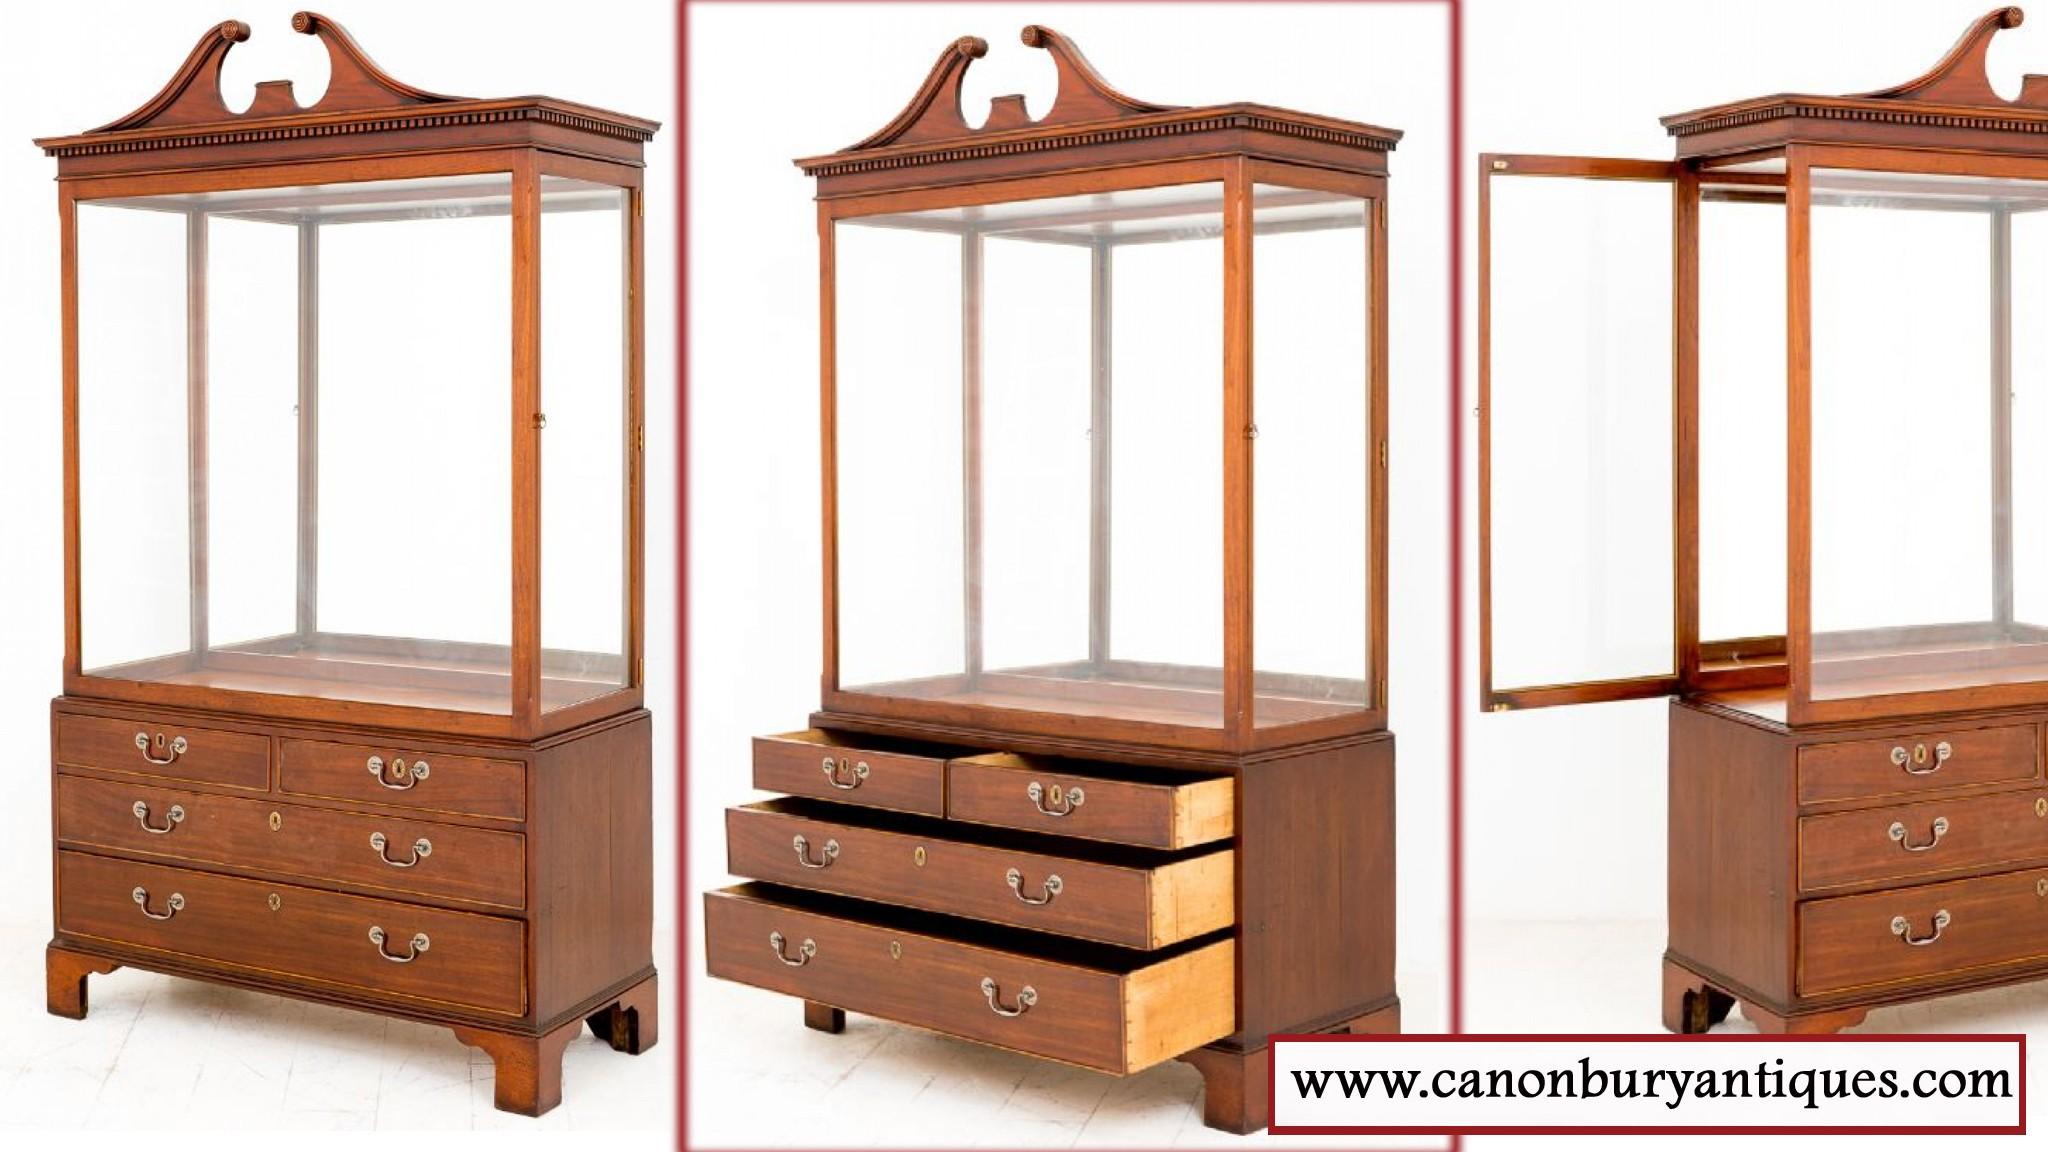 A Lovely Mahogany display cabinet with Georgian elements.
Standing on Bracket feet with an arrangement of 2 over 2 Oak lined drawers.
The top section with 2 x opening doors and a parquet floor and mirrored back.
The dentil cornice adorned with a